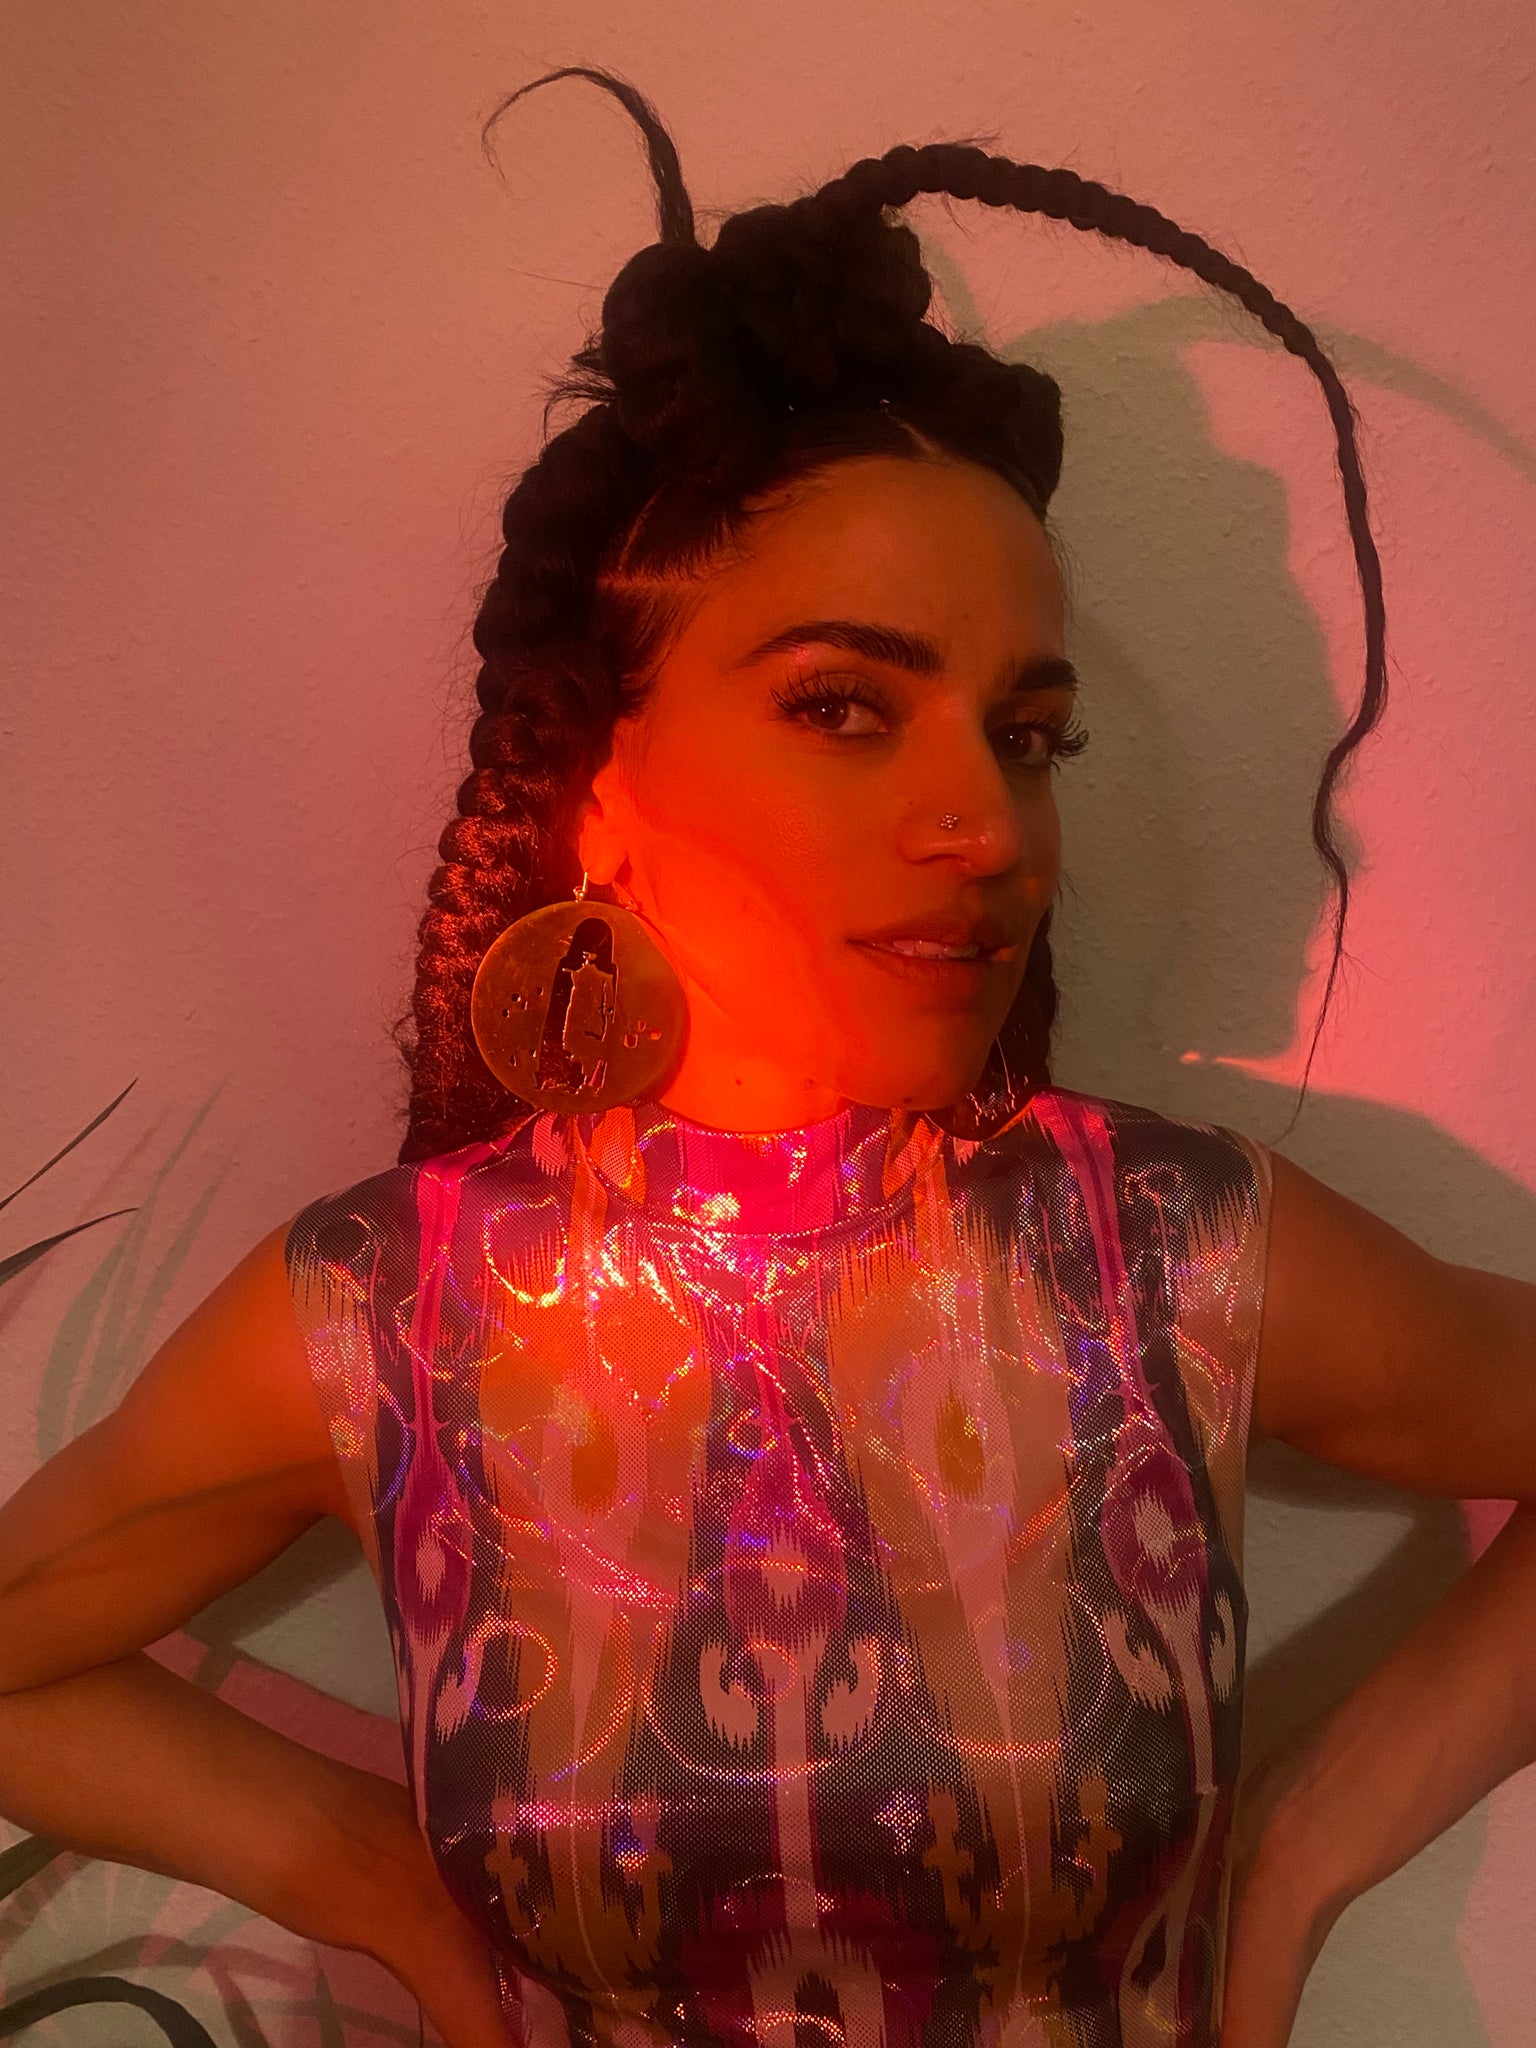 A woman with braids and hoops smiles at the camera, red light shining on her face.